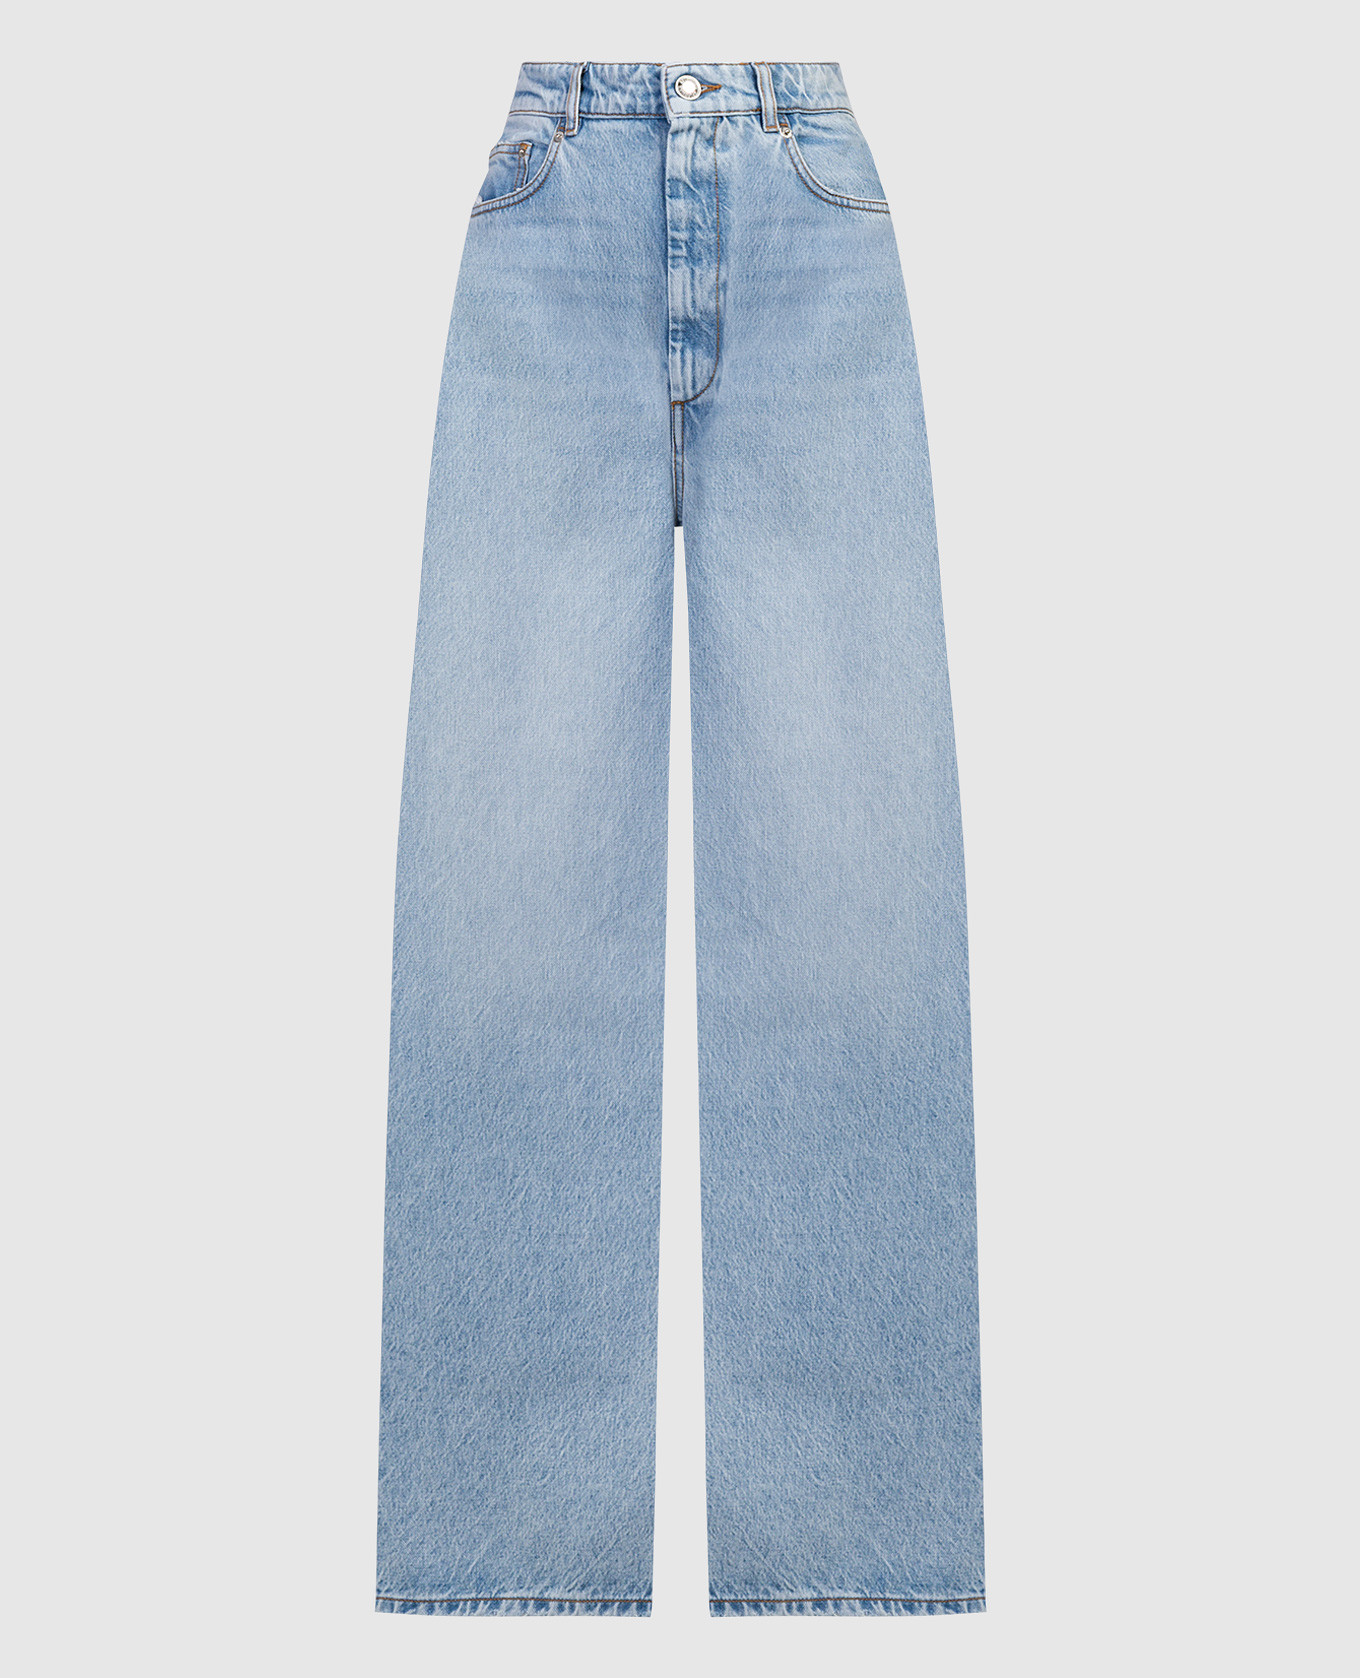 ANGRI blue jeans with logo patch